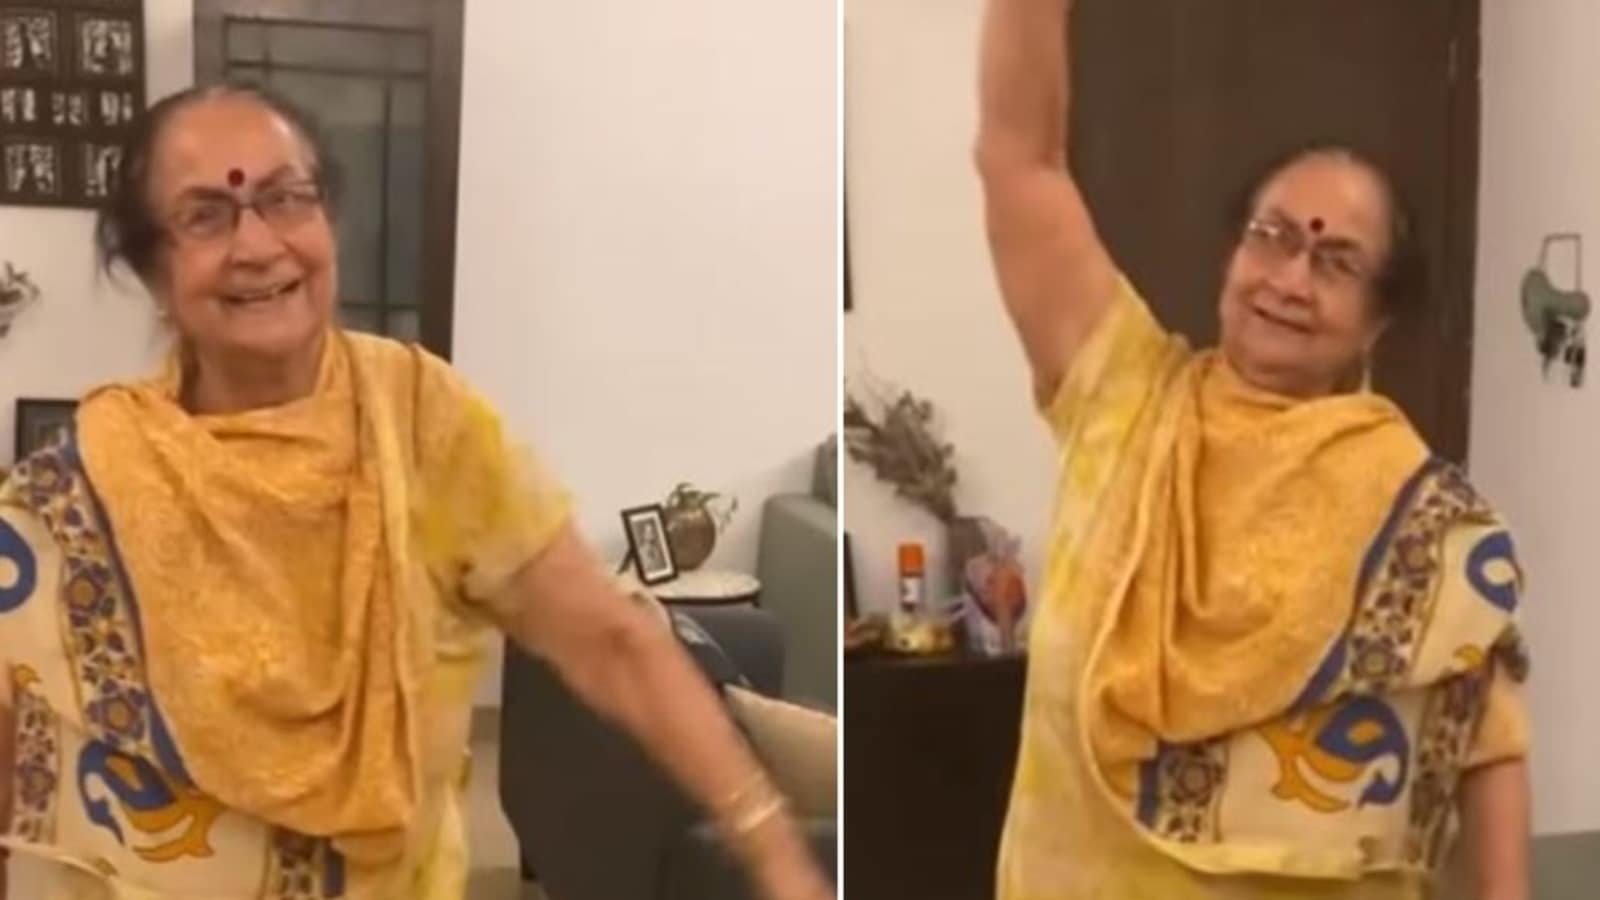 Anupam Kher’s mom Dulari grooves to Srivalli, he thanks niece Vrinda: ‘You brought out the dancer in her’